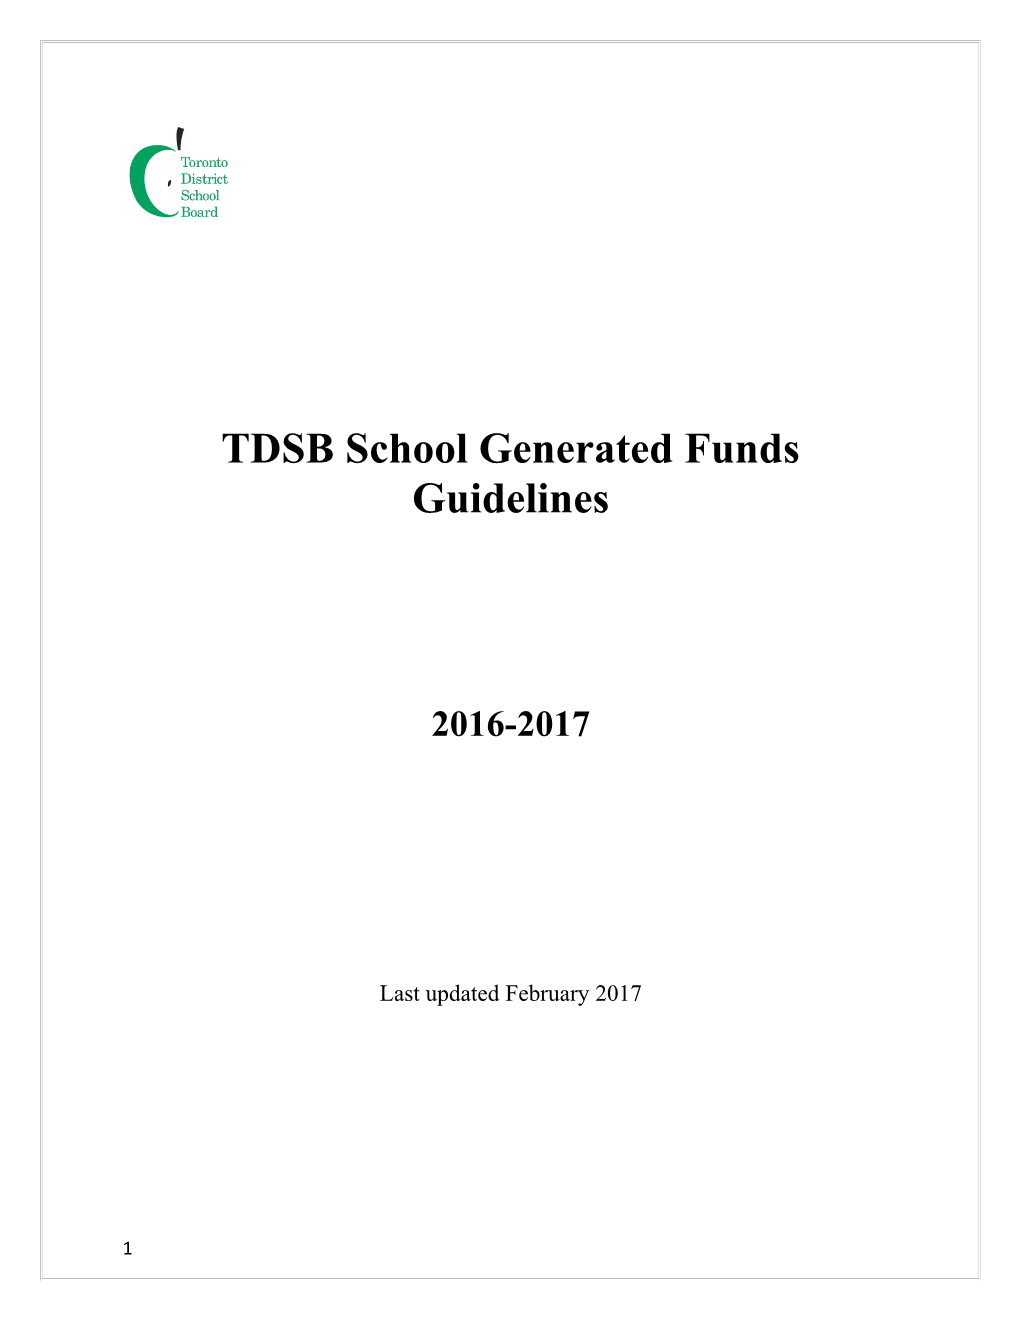 TDSB School Generated Funds Guidelines